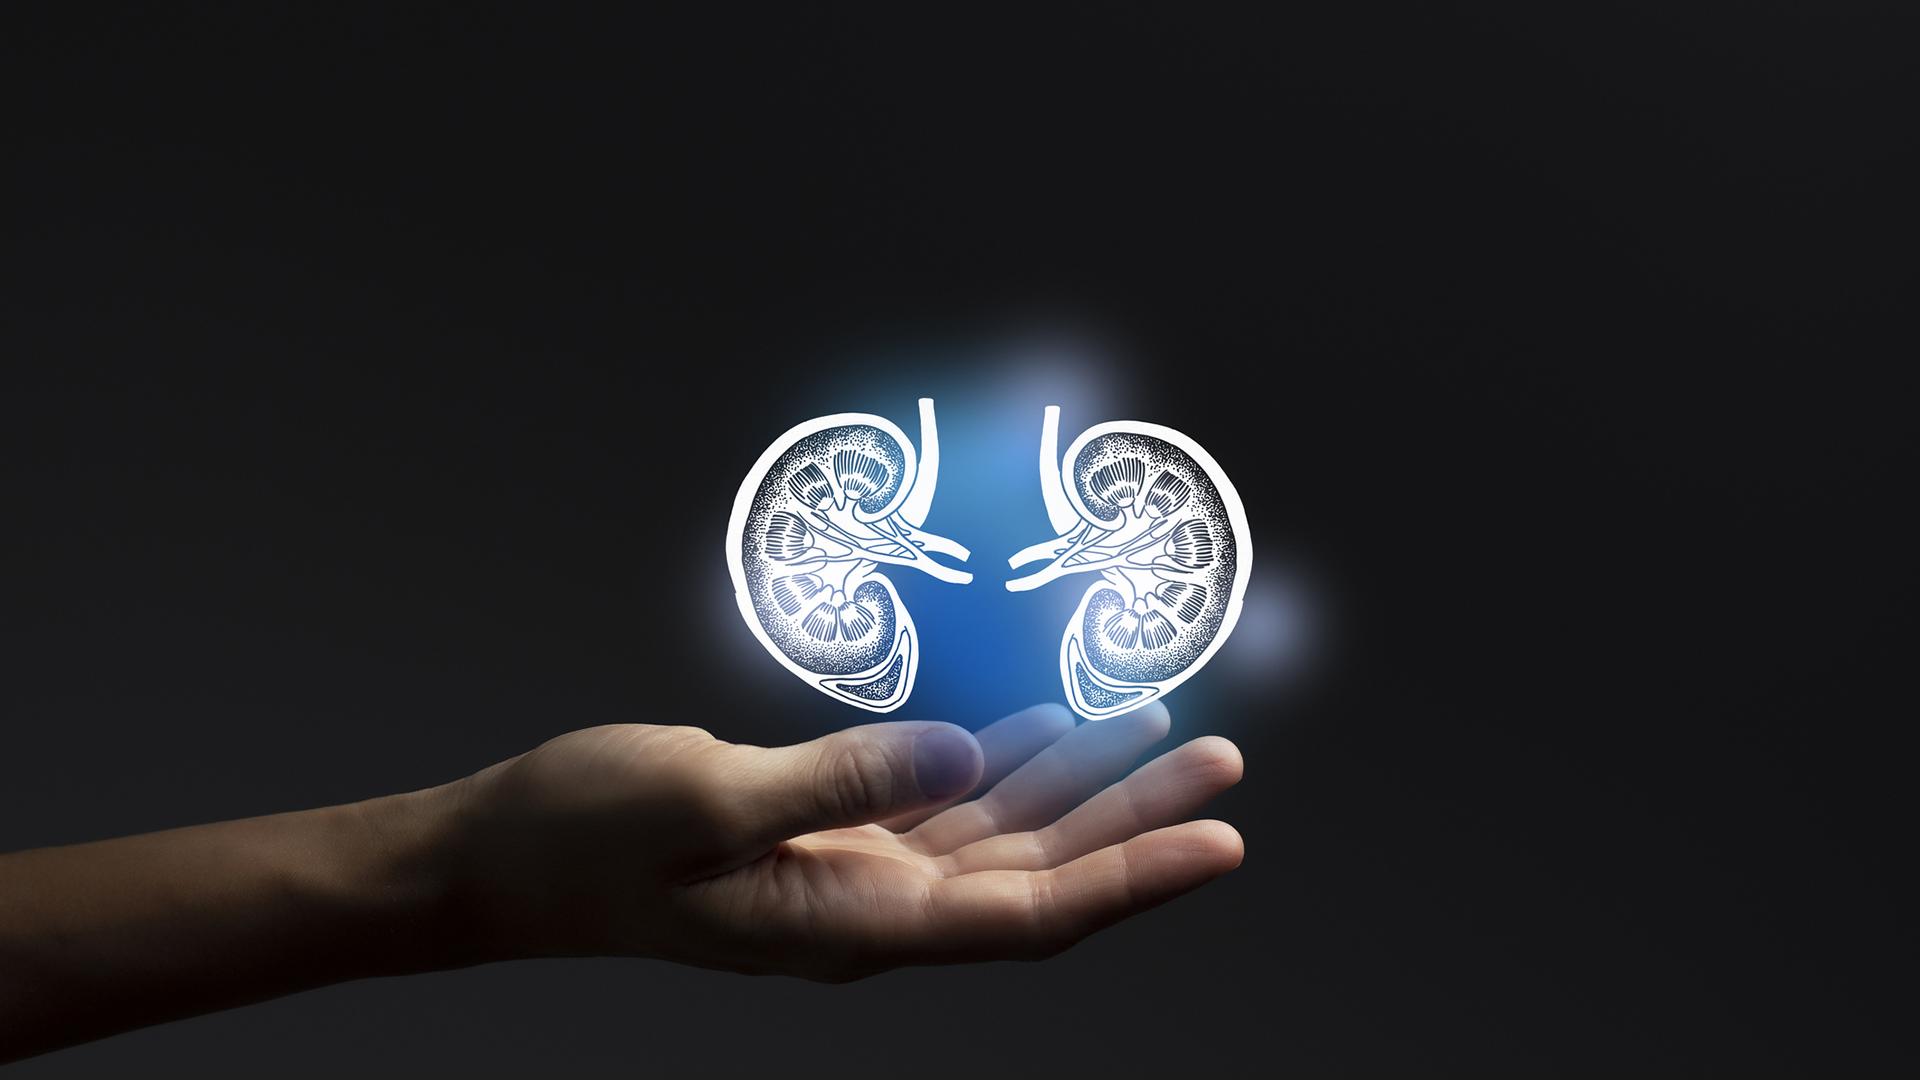 Living donors superior for paediatric kidney transplants